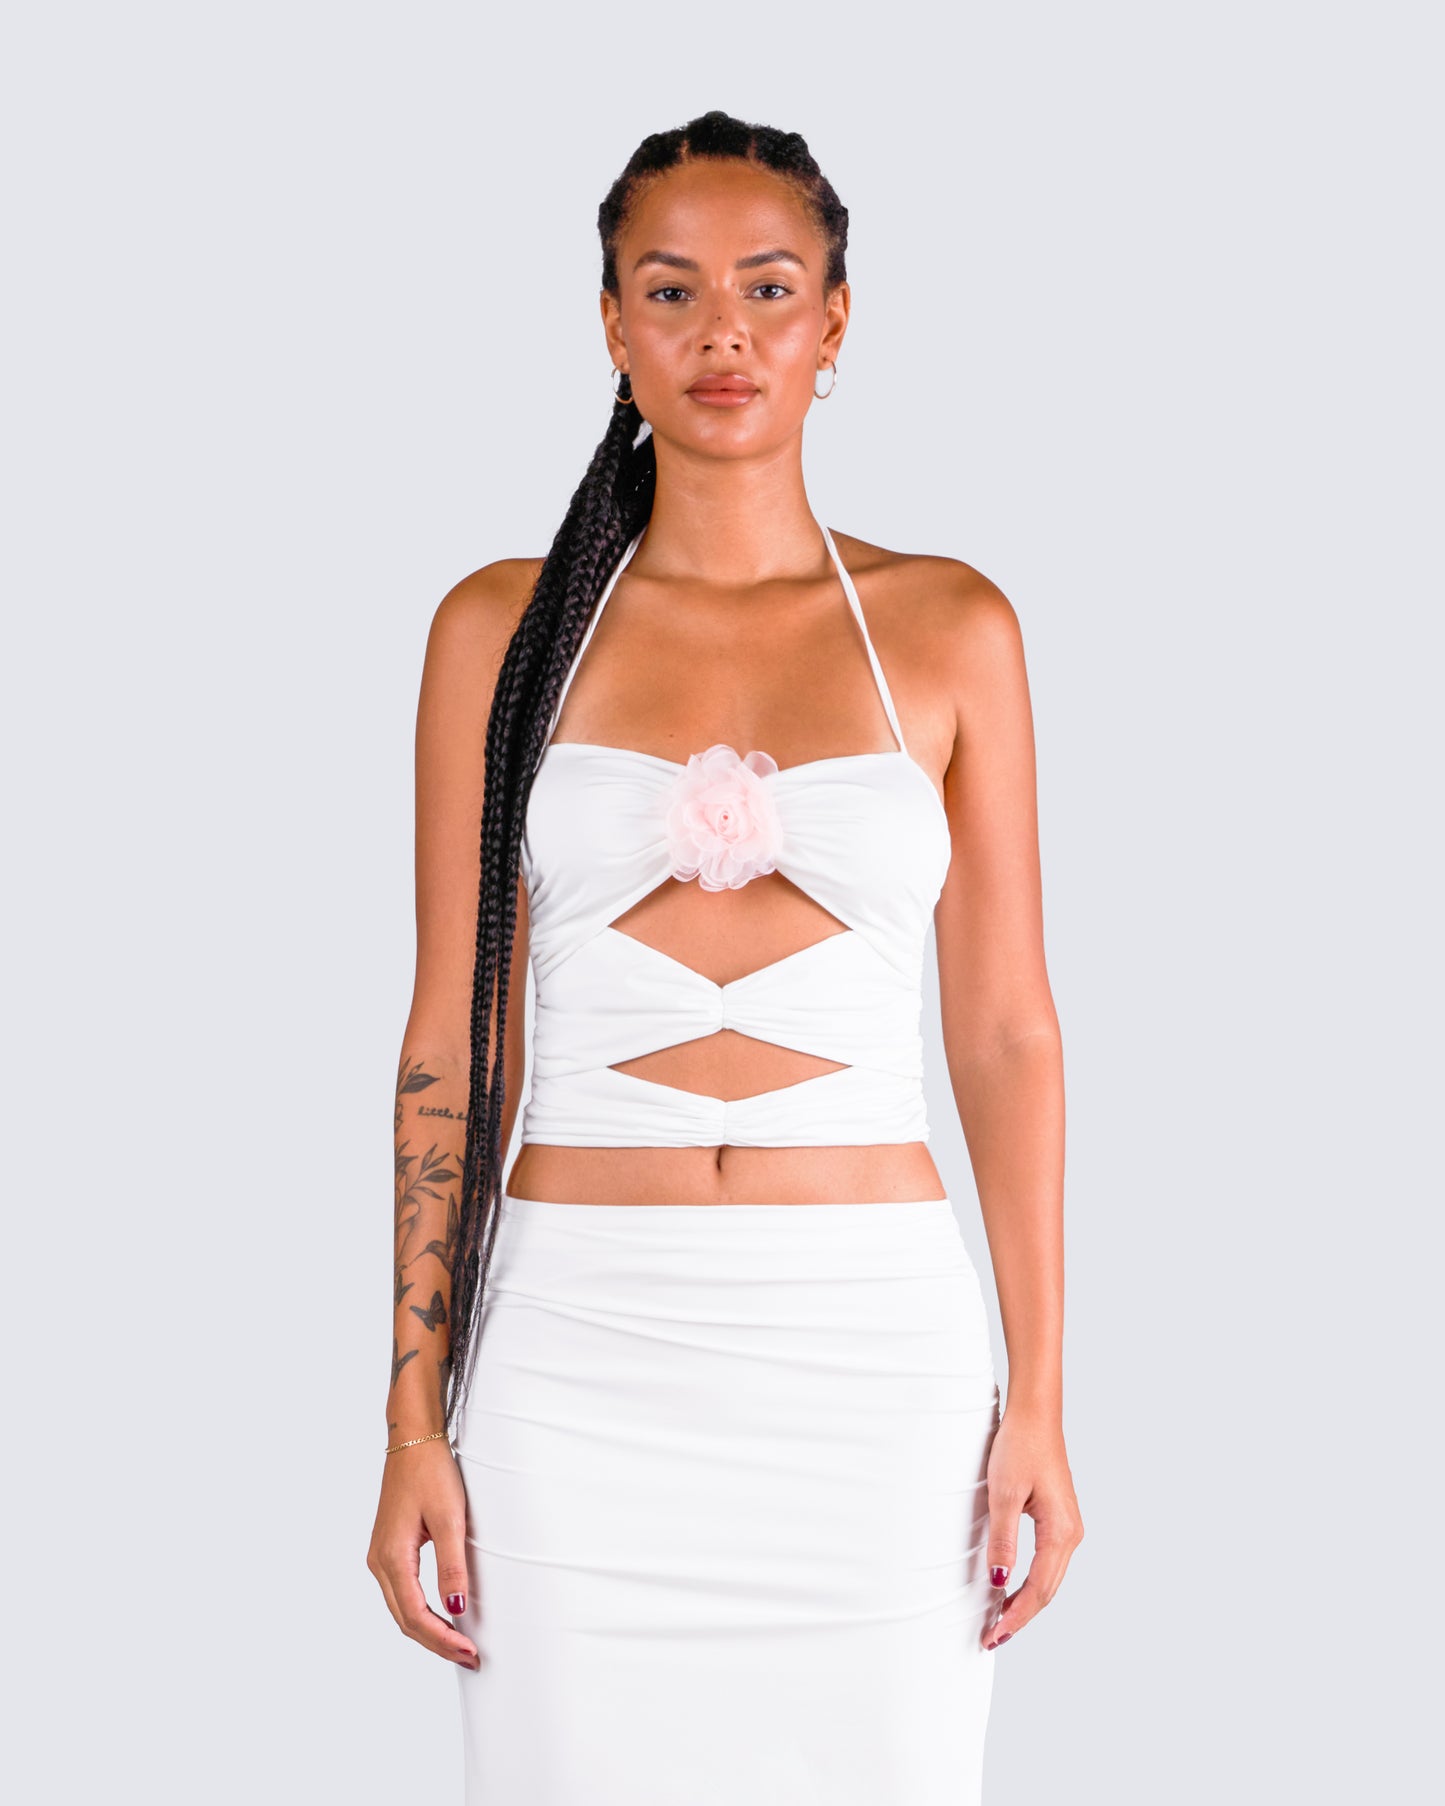 Cerelina White Jersey Cut Out Top